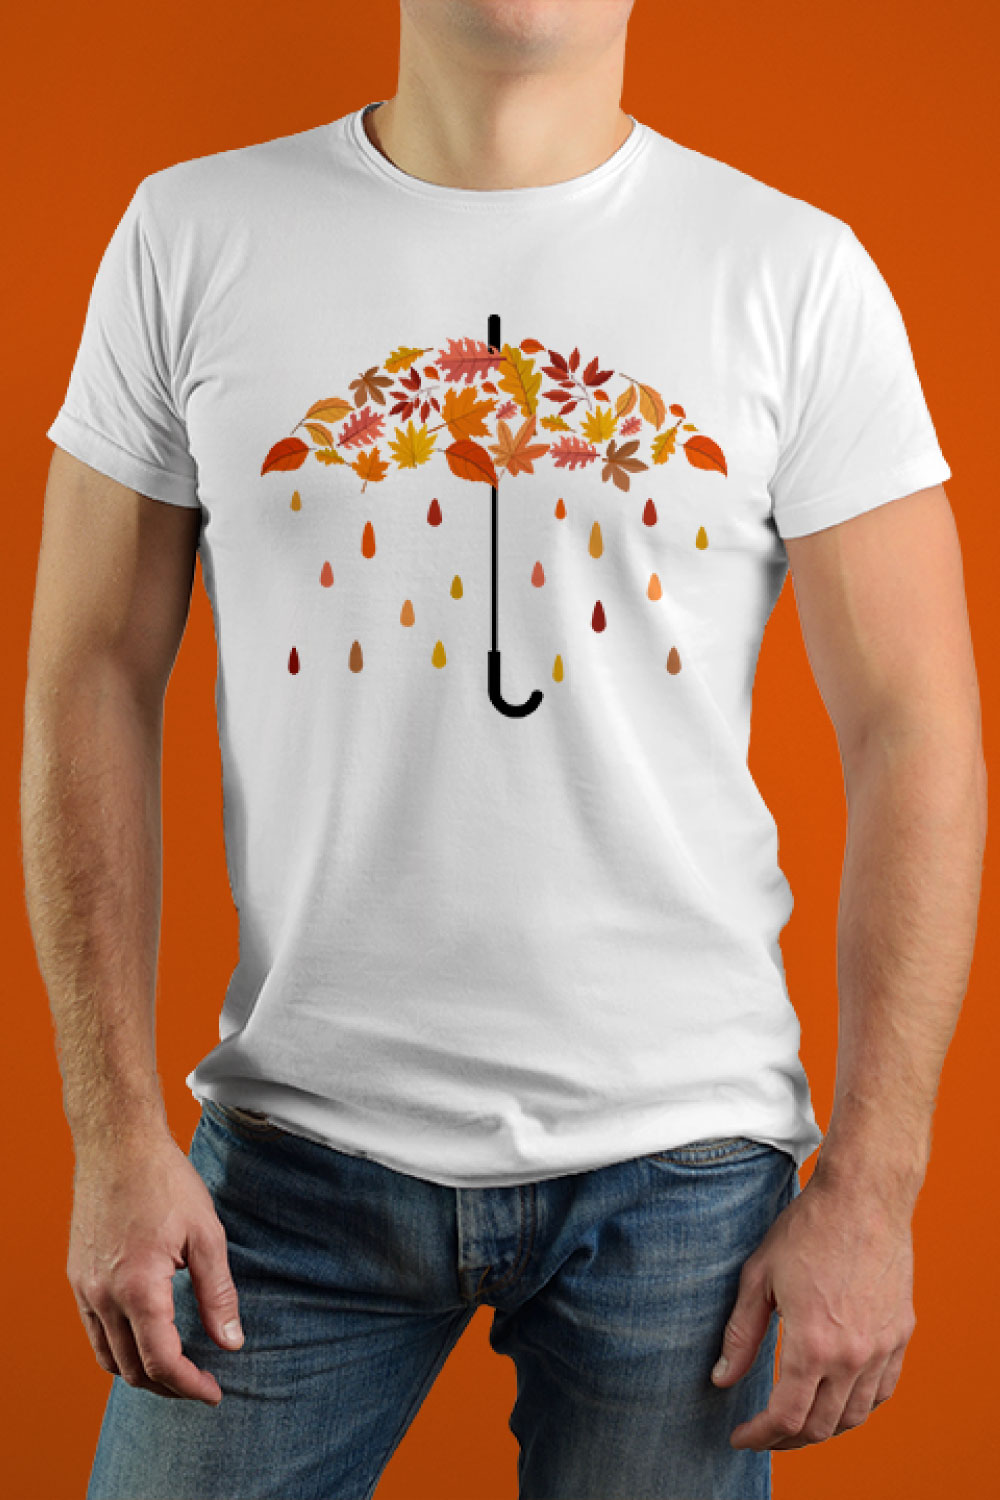 Autumn Leaves Umbrella With Falling Colorful Drops T Shirt Design pinterest preview image.